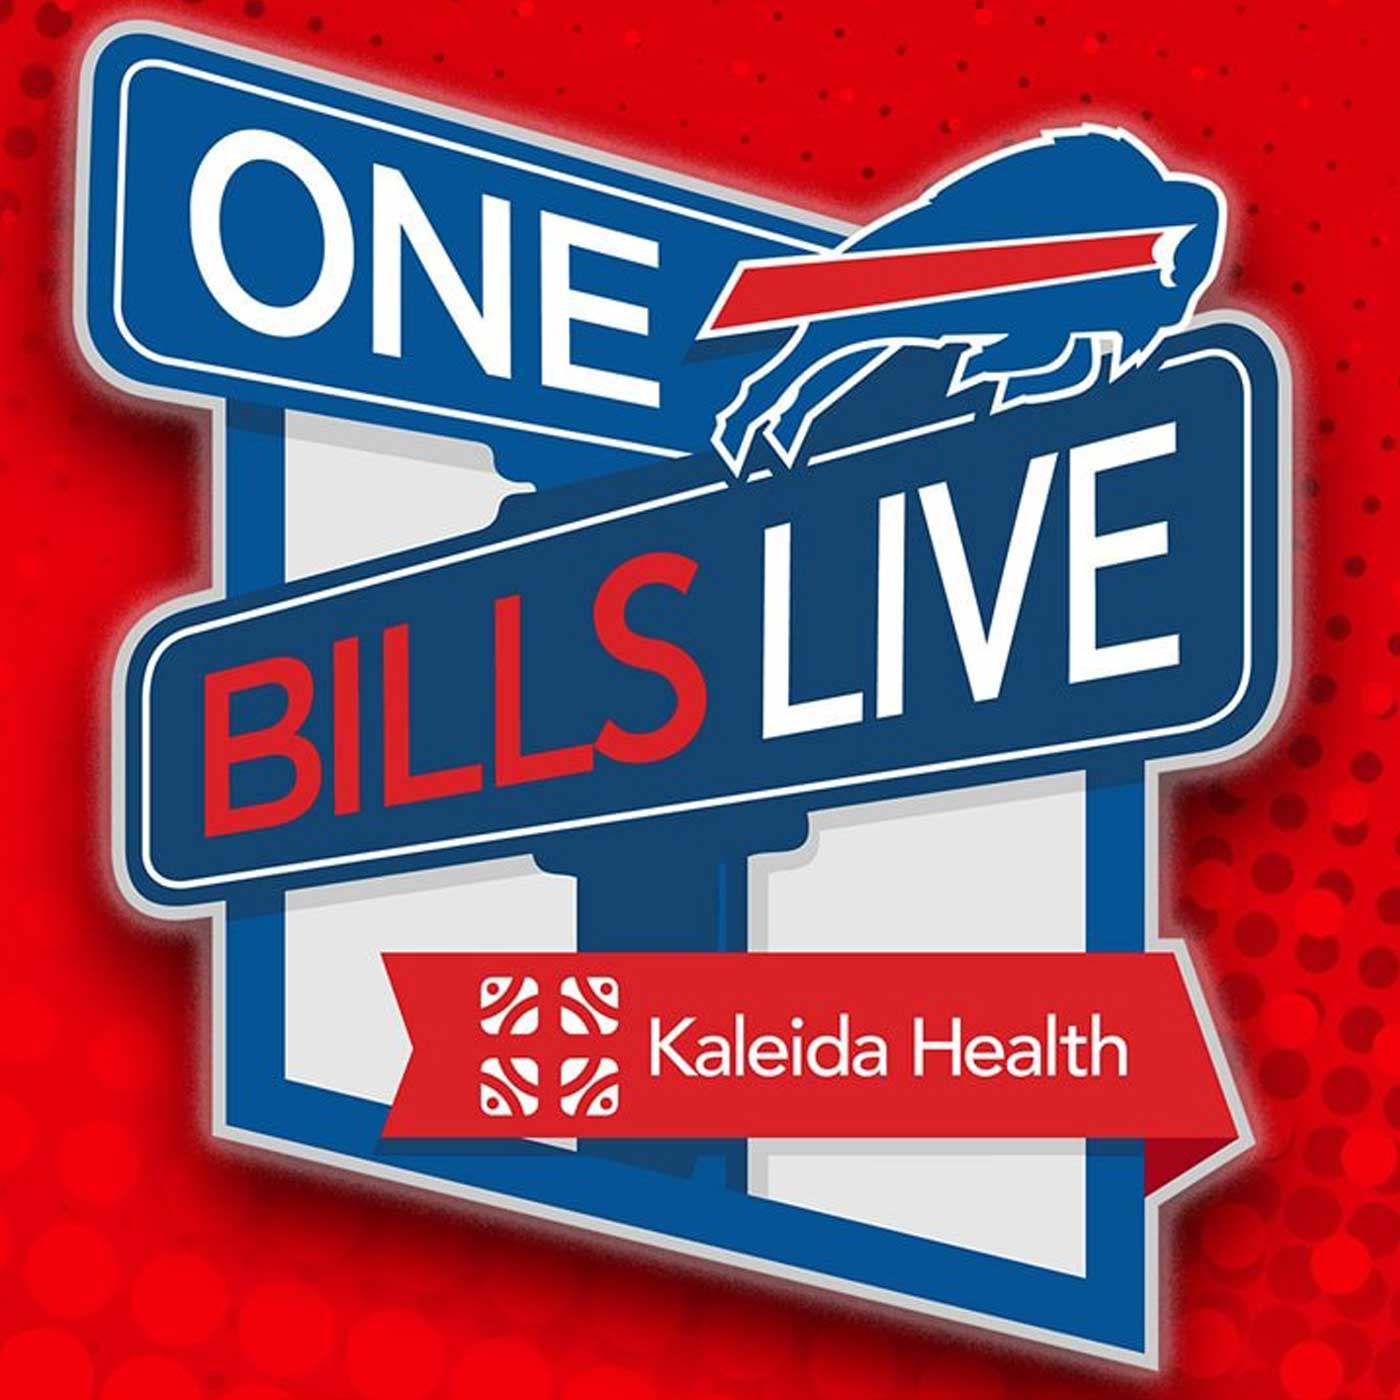 "Do You Prefer The Bills To The Underdog or The Favorite?" | One Bills Live Poll